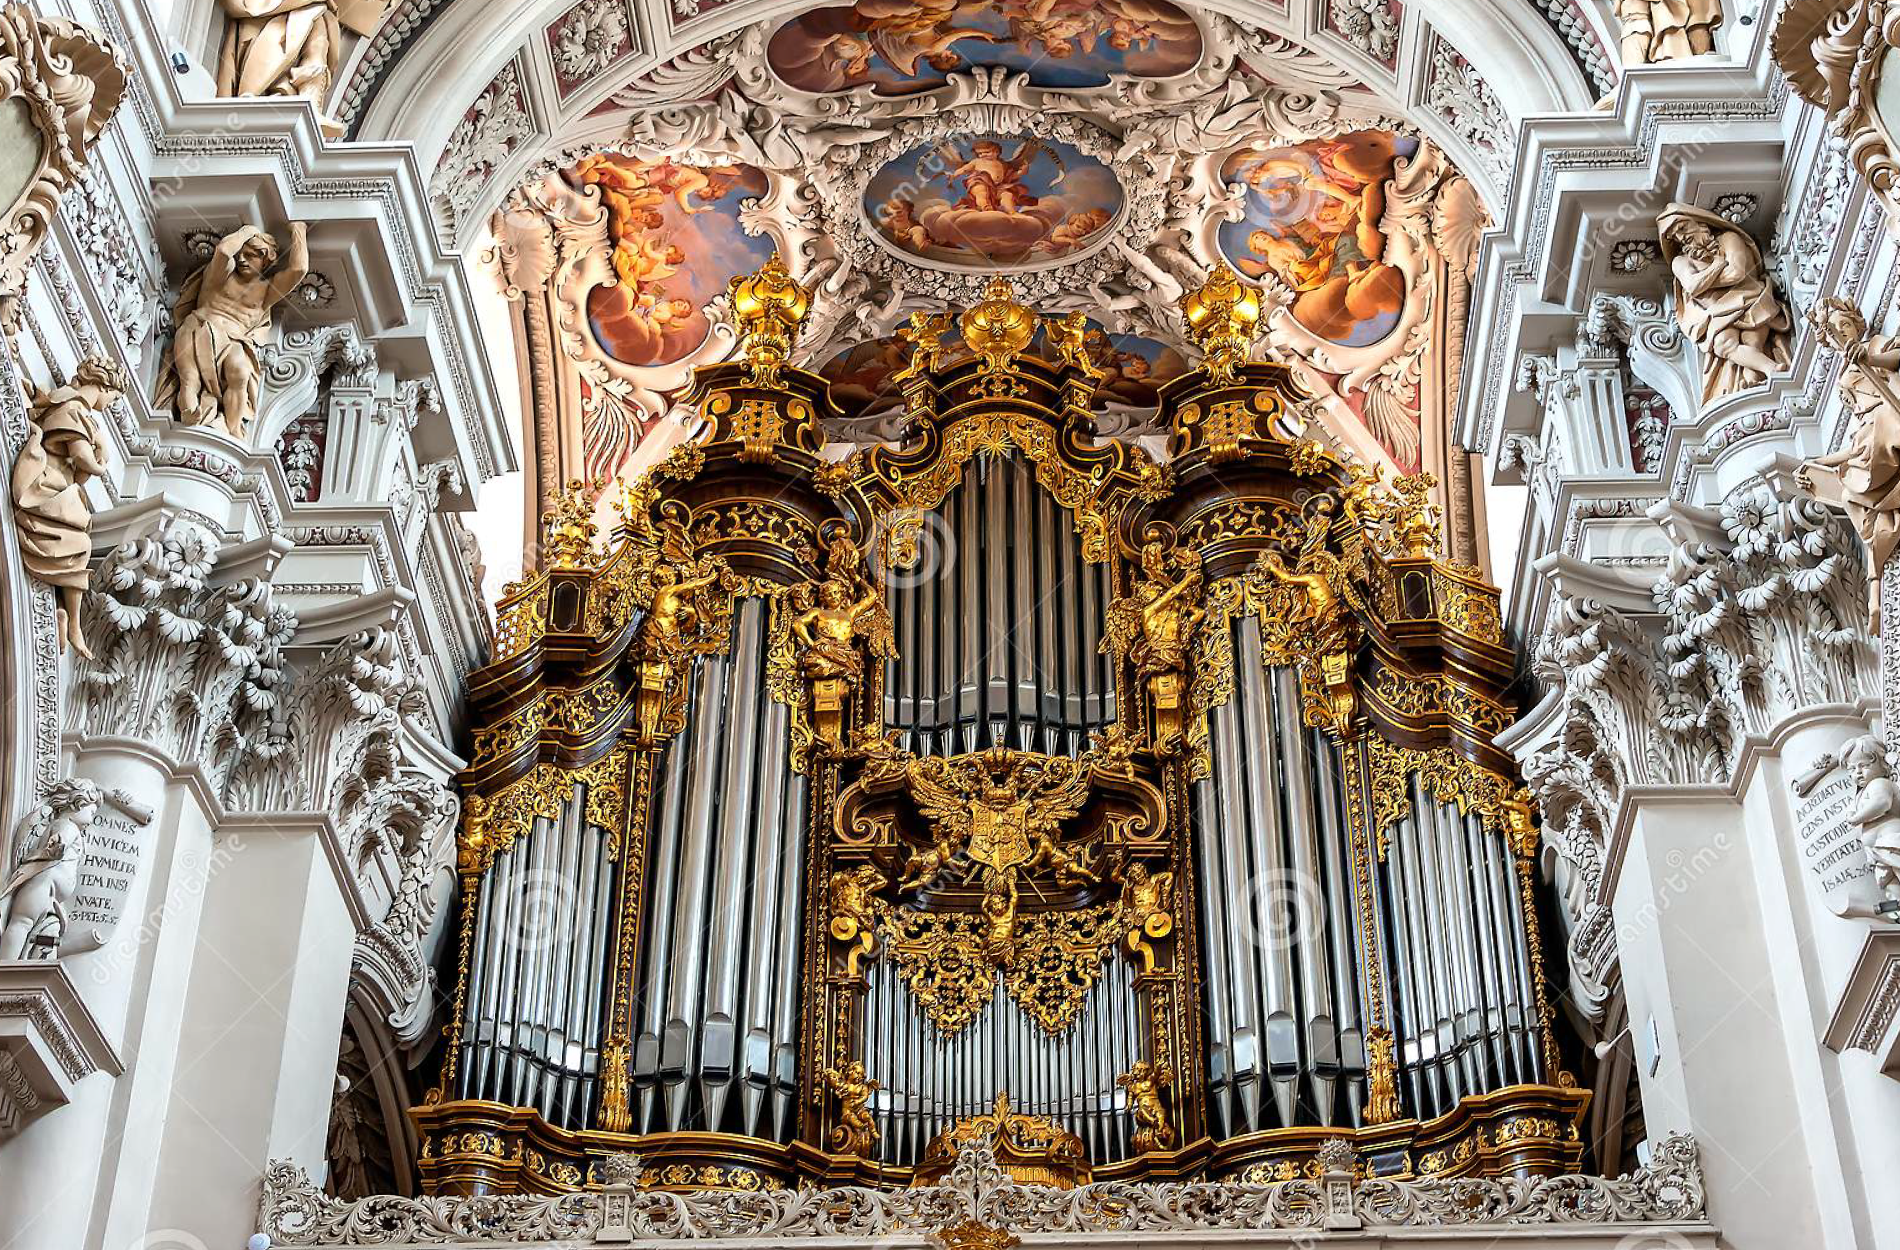 The-organ-in-St.-Stephen's-Cathedral